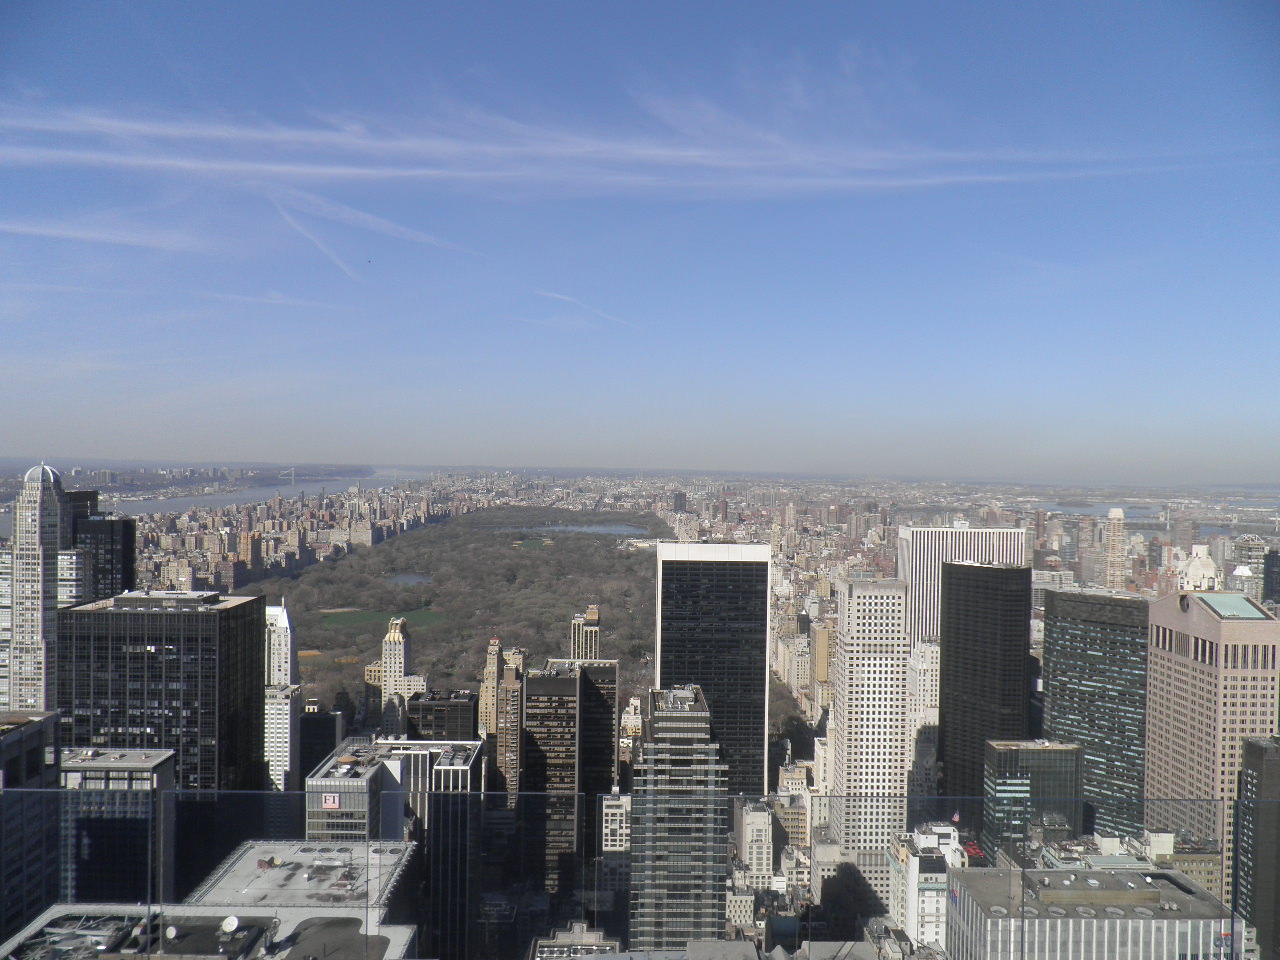 The view of Central Park from the Top of the Rock - N.Y